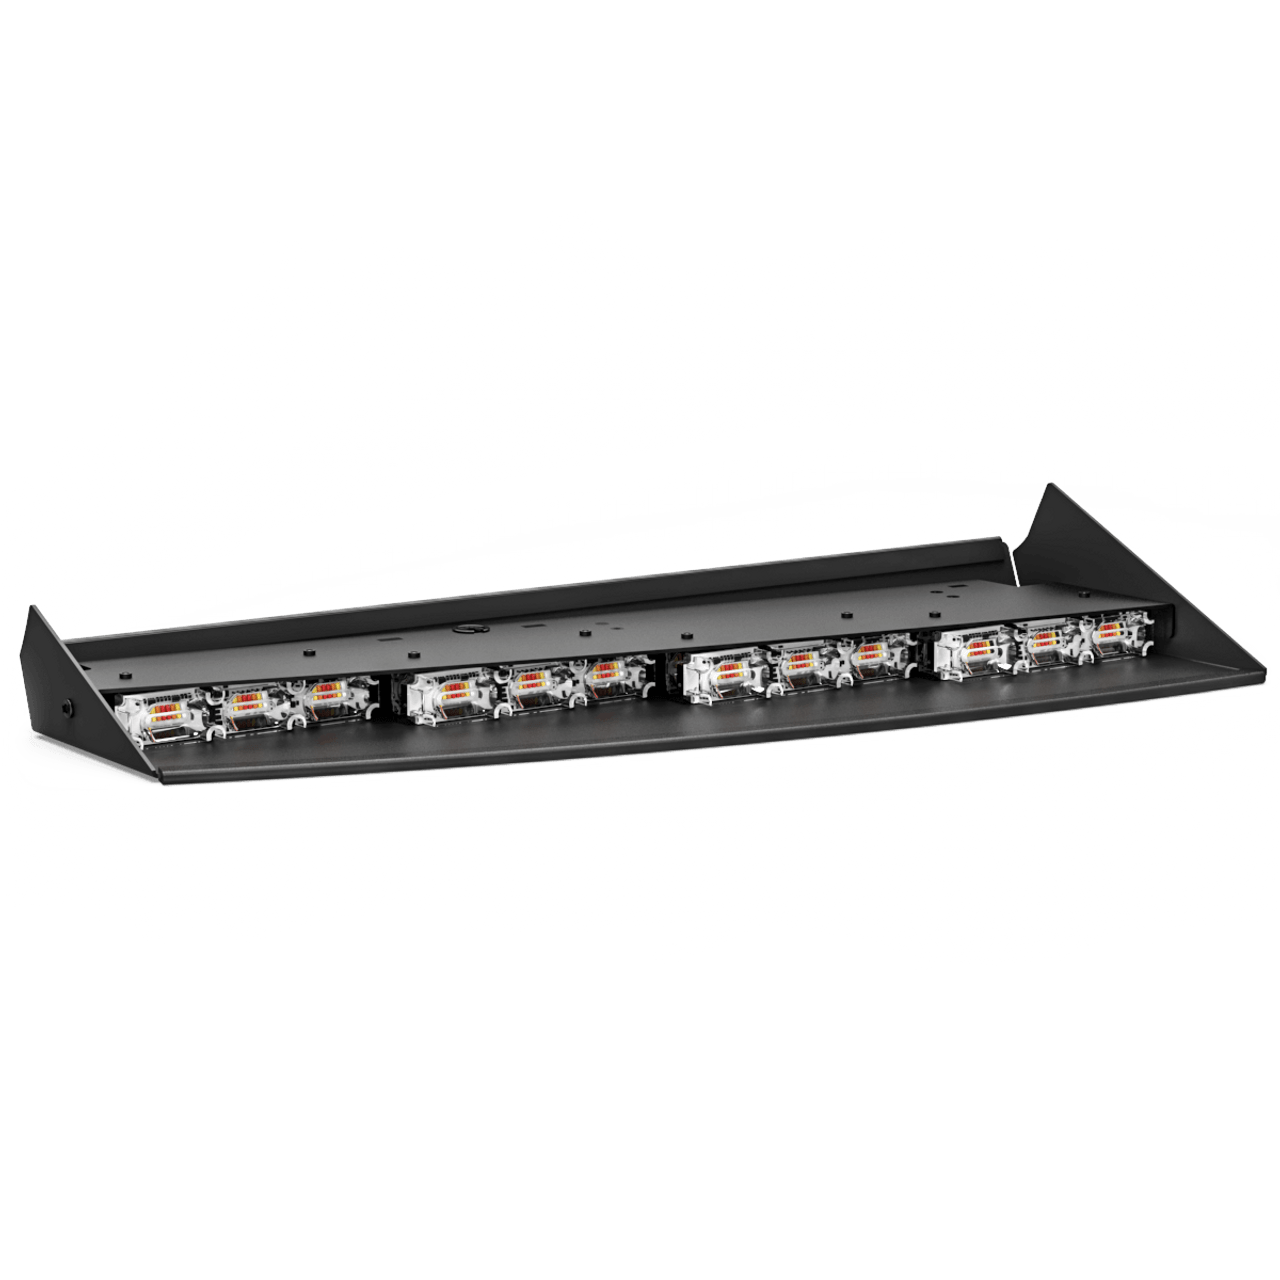 Feniex Q-0811-CHG-15-20 Quad, Dodge Charger, 2015-2021 Interior Light Bar, Front Facing, Four LED Colors Each Side (Red, Blue, White and Amber)